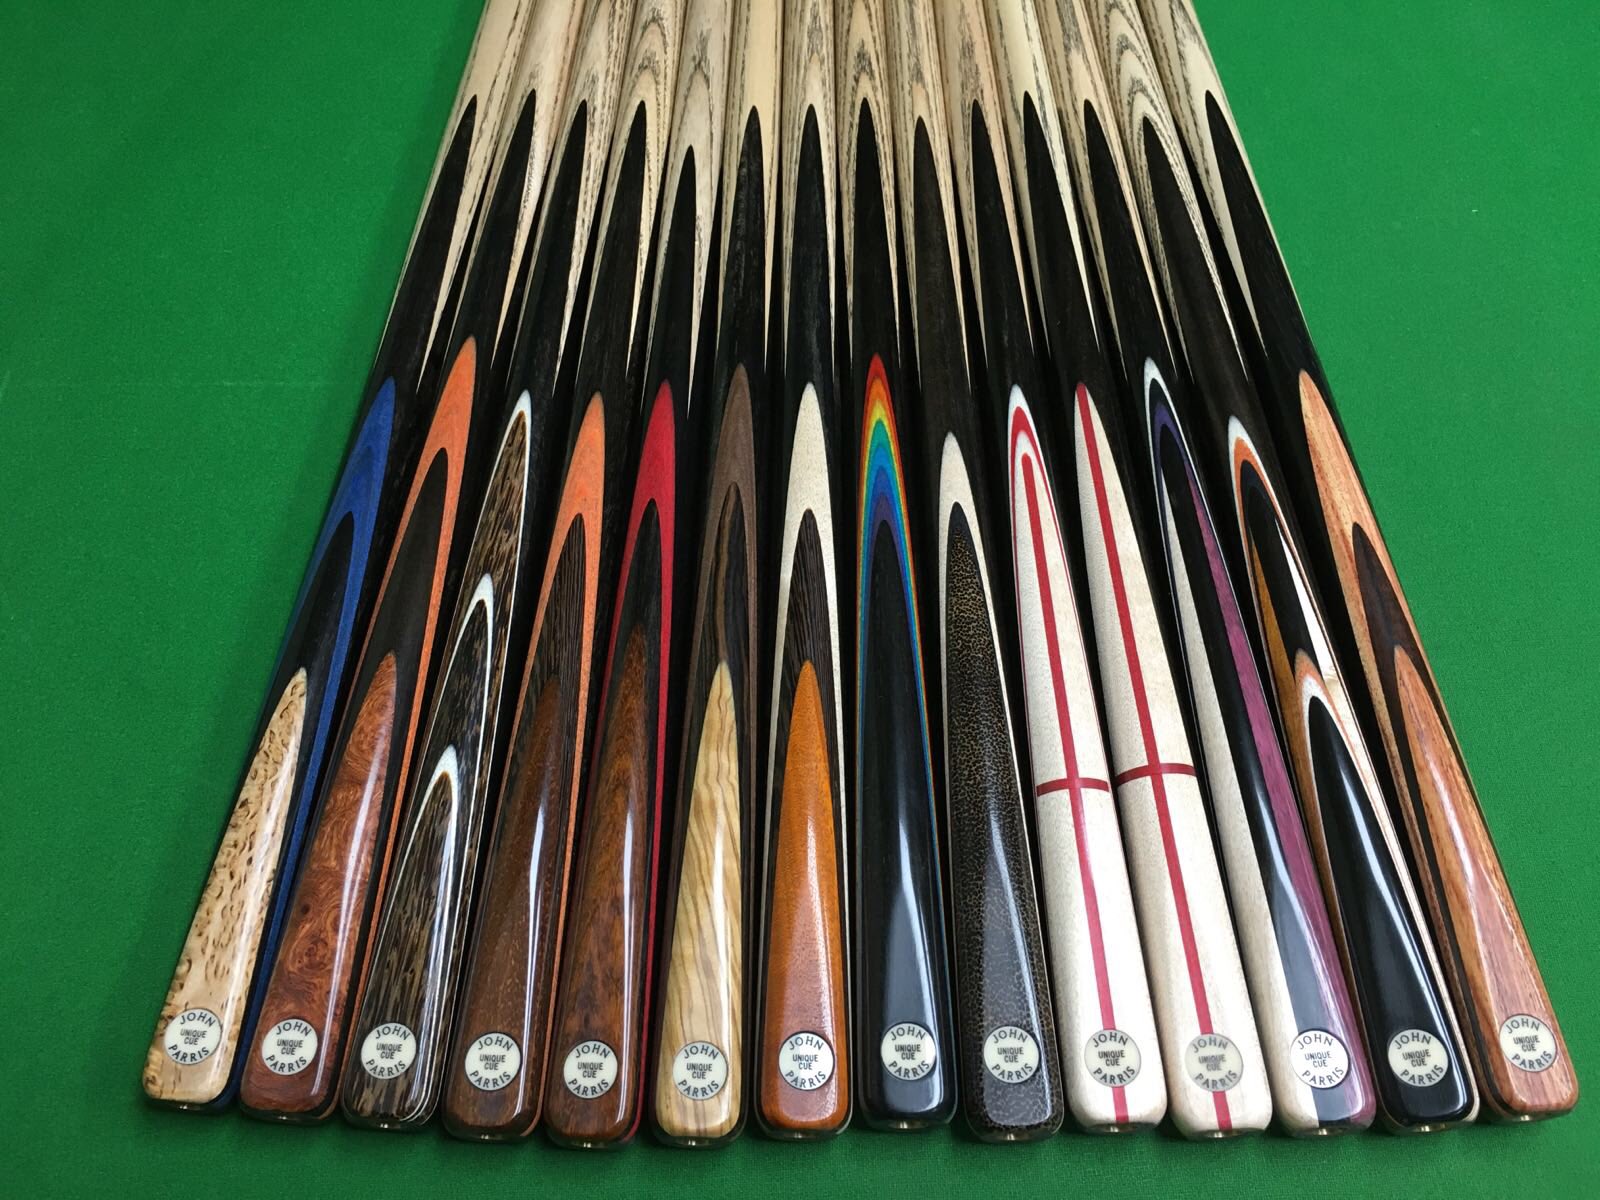 Snooker cues: What is the difference between handmade and hand crafted snooker cues?